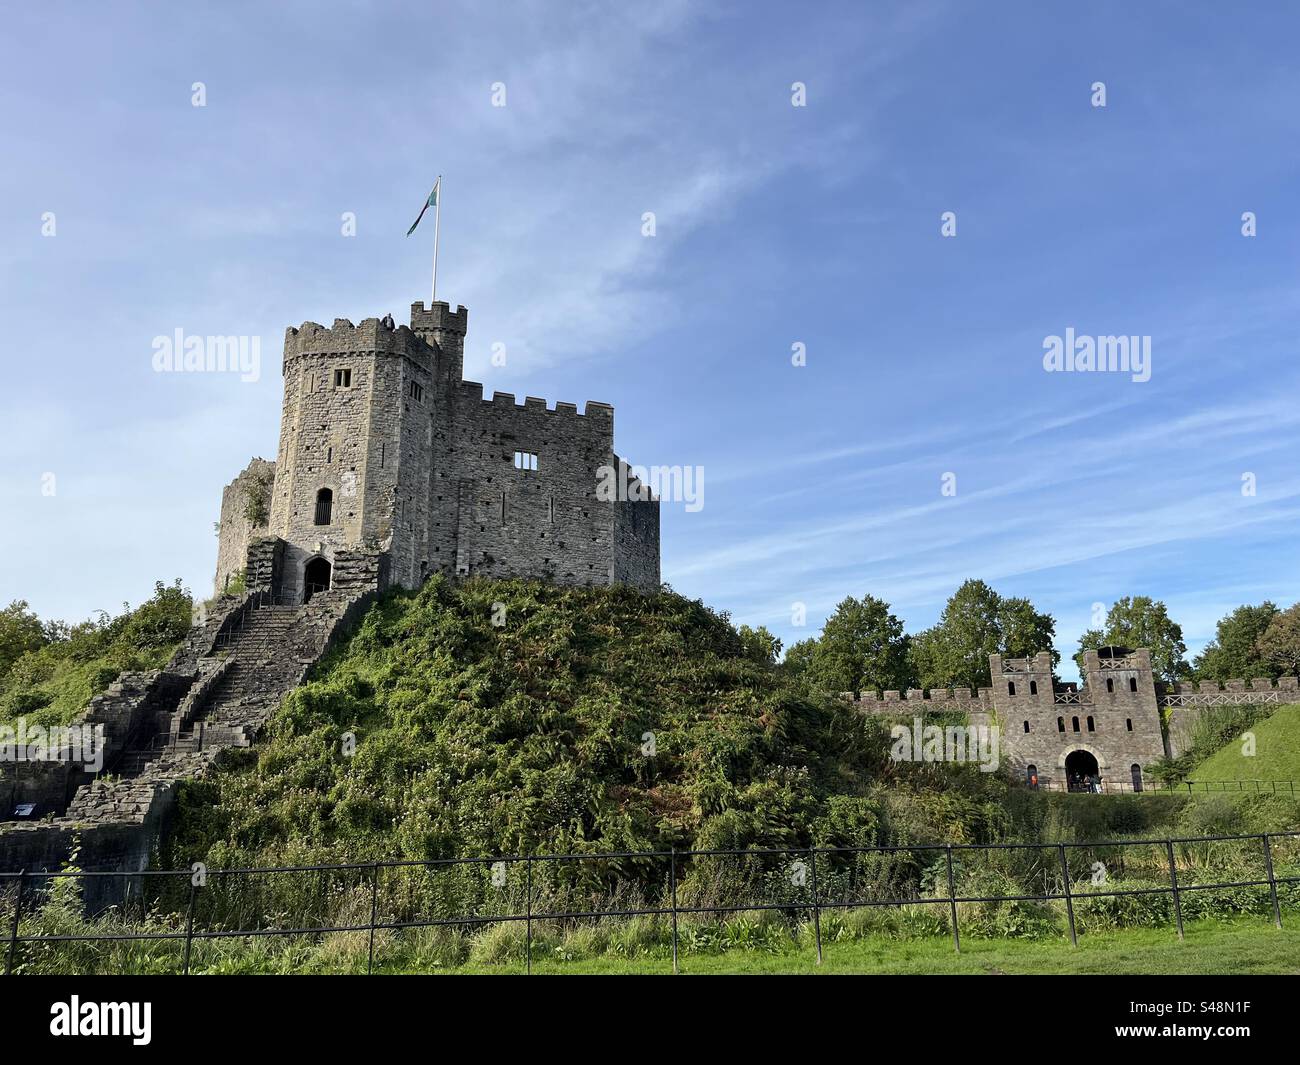 Cardiff Castle, a medieval castle, located in the city centre of Cardiff, Wales. The original motte, and bailey castle was built in the 11th century by Norman invaders on top of a 3rd century fort. Stock Photo